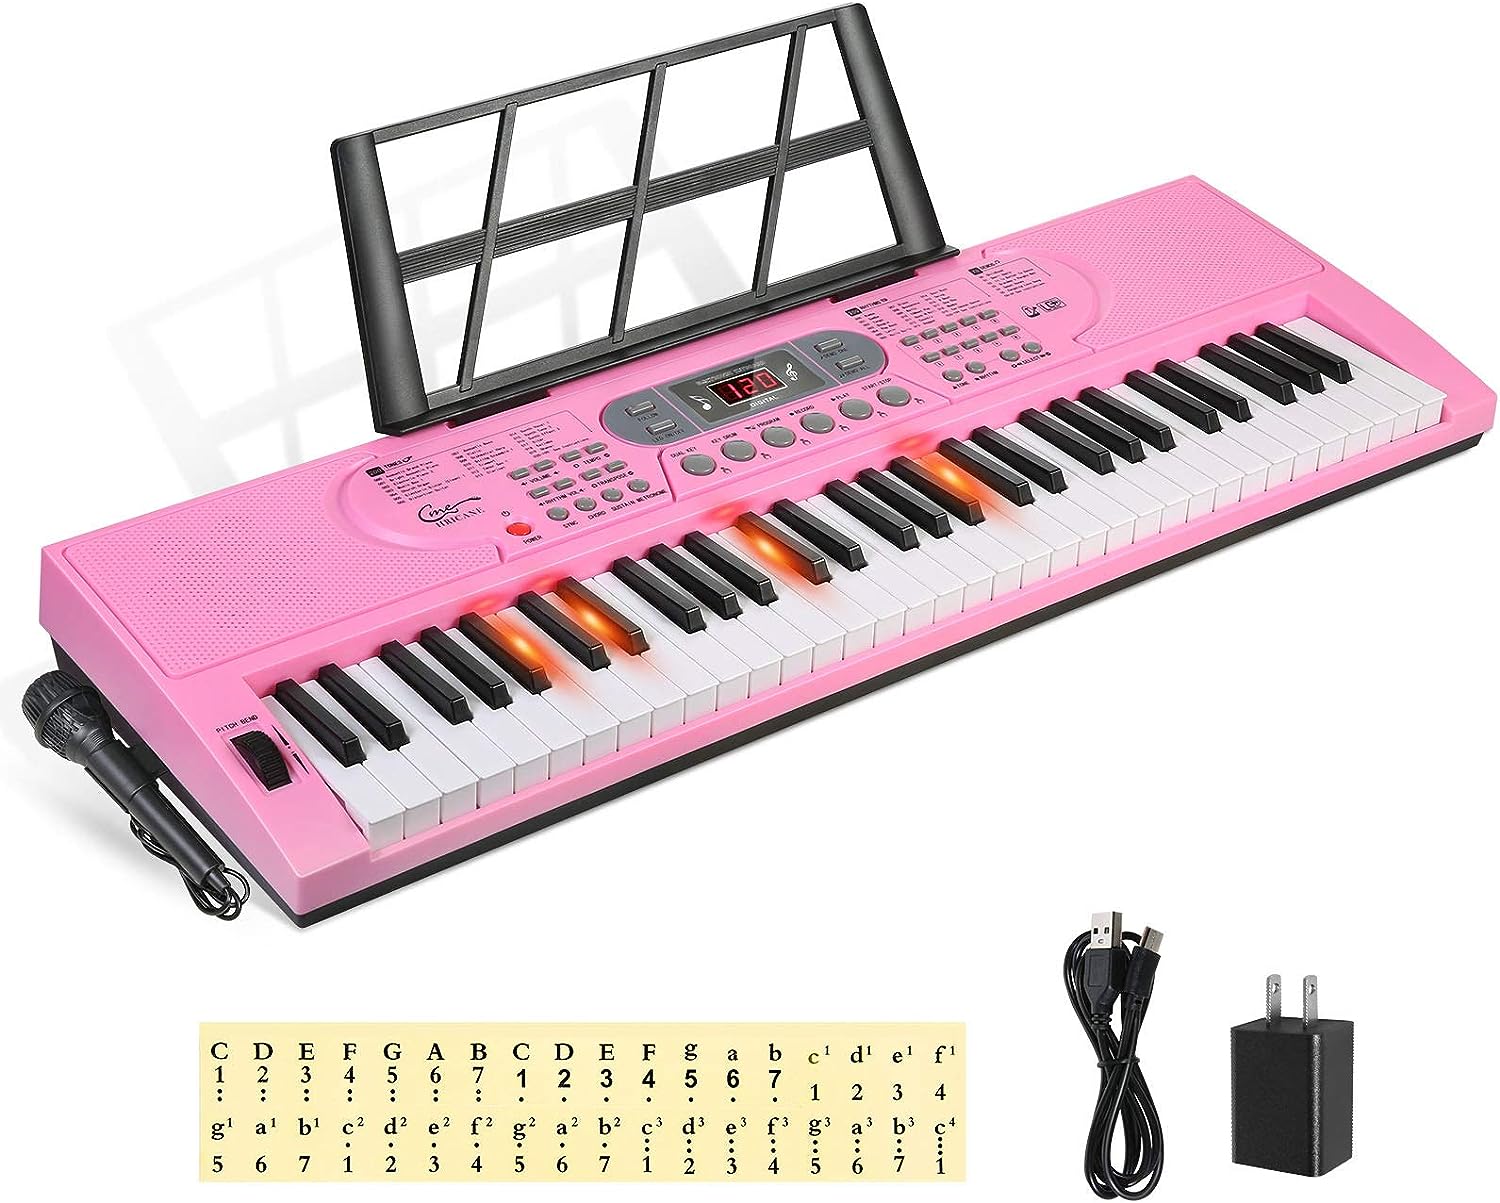 Hricane Keyboard Piano Lighted Keys for Beginner Adults Teens Kids, 61 Key Electronic Music Keyboard with Teaching Modes Powered by USB or Battery with LCD Display Microphone Headphone Jack